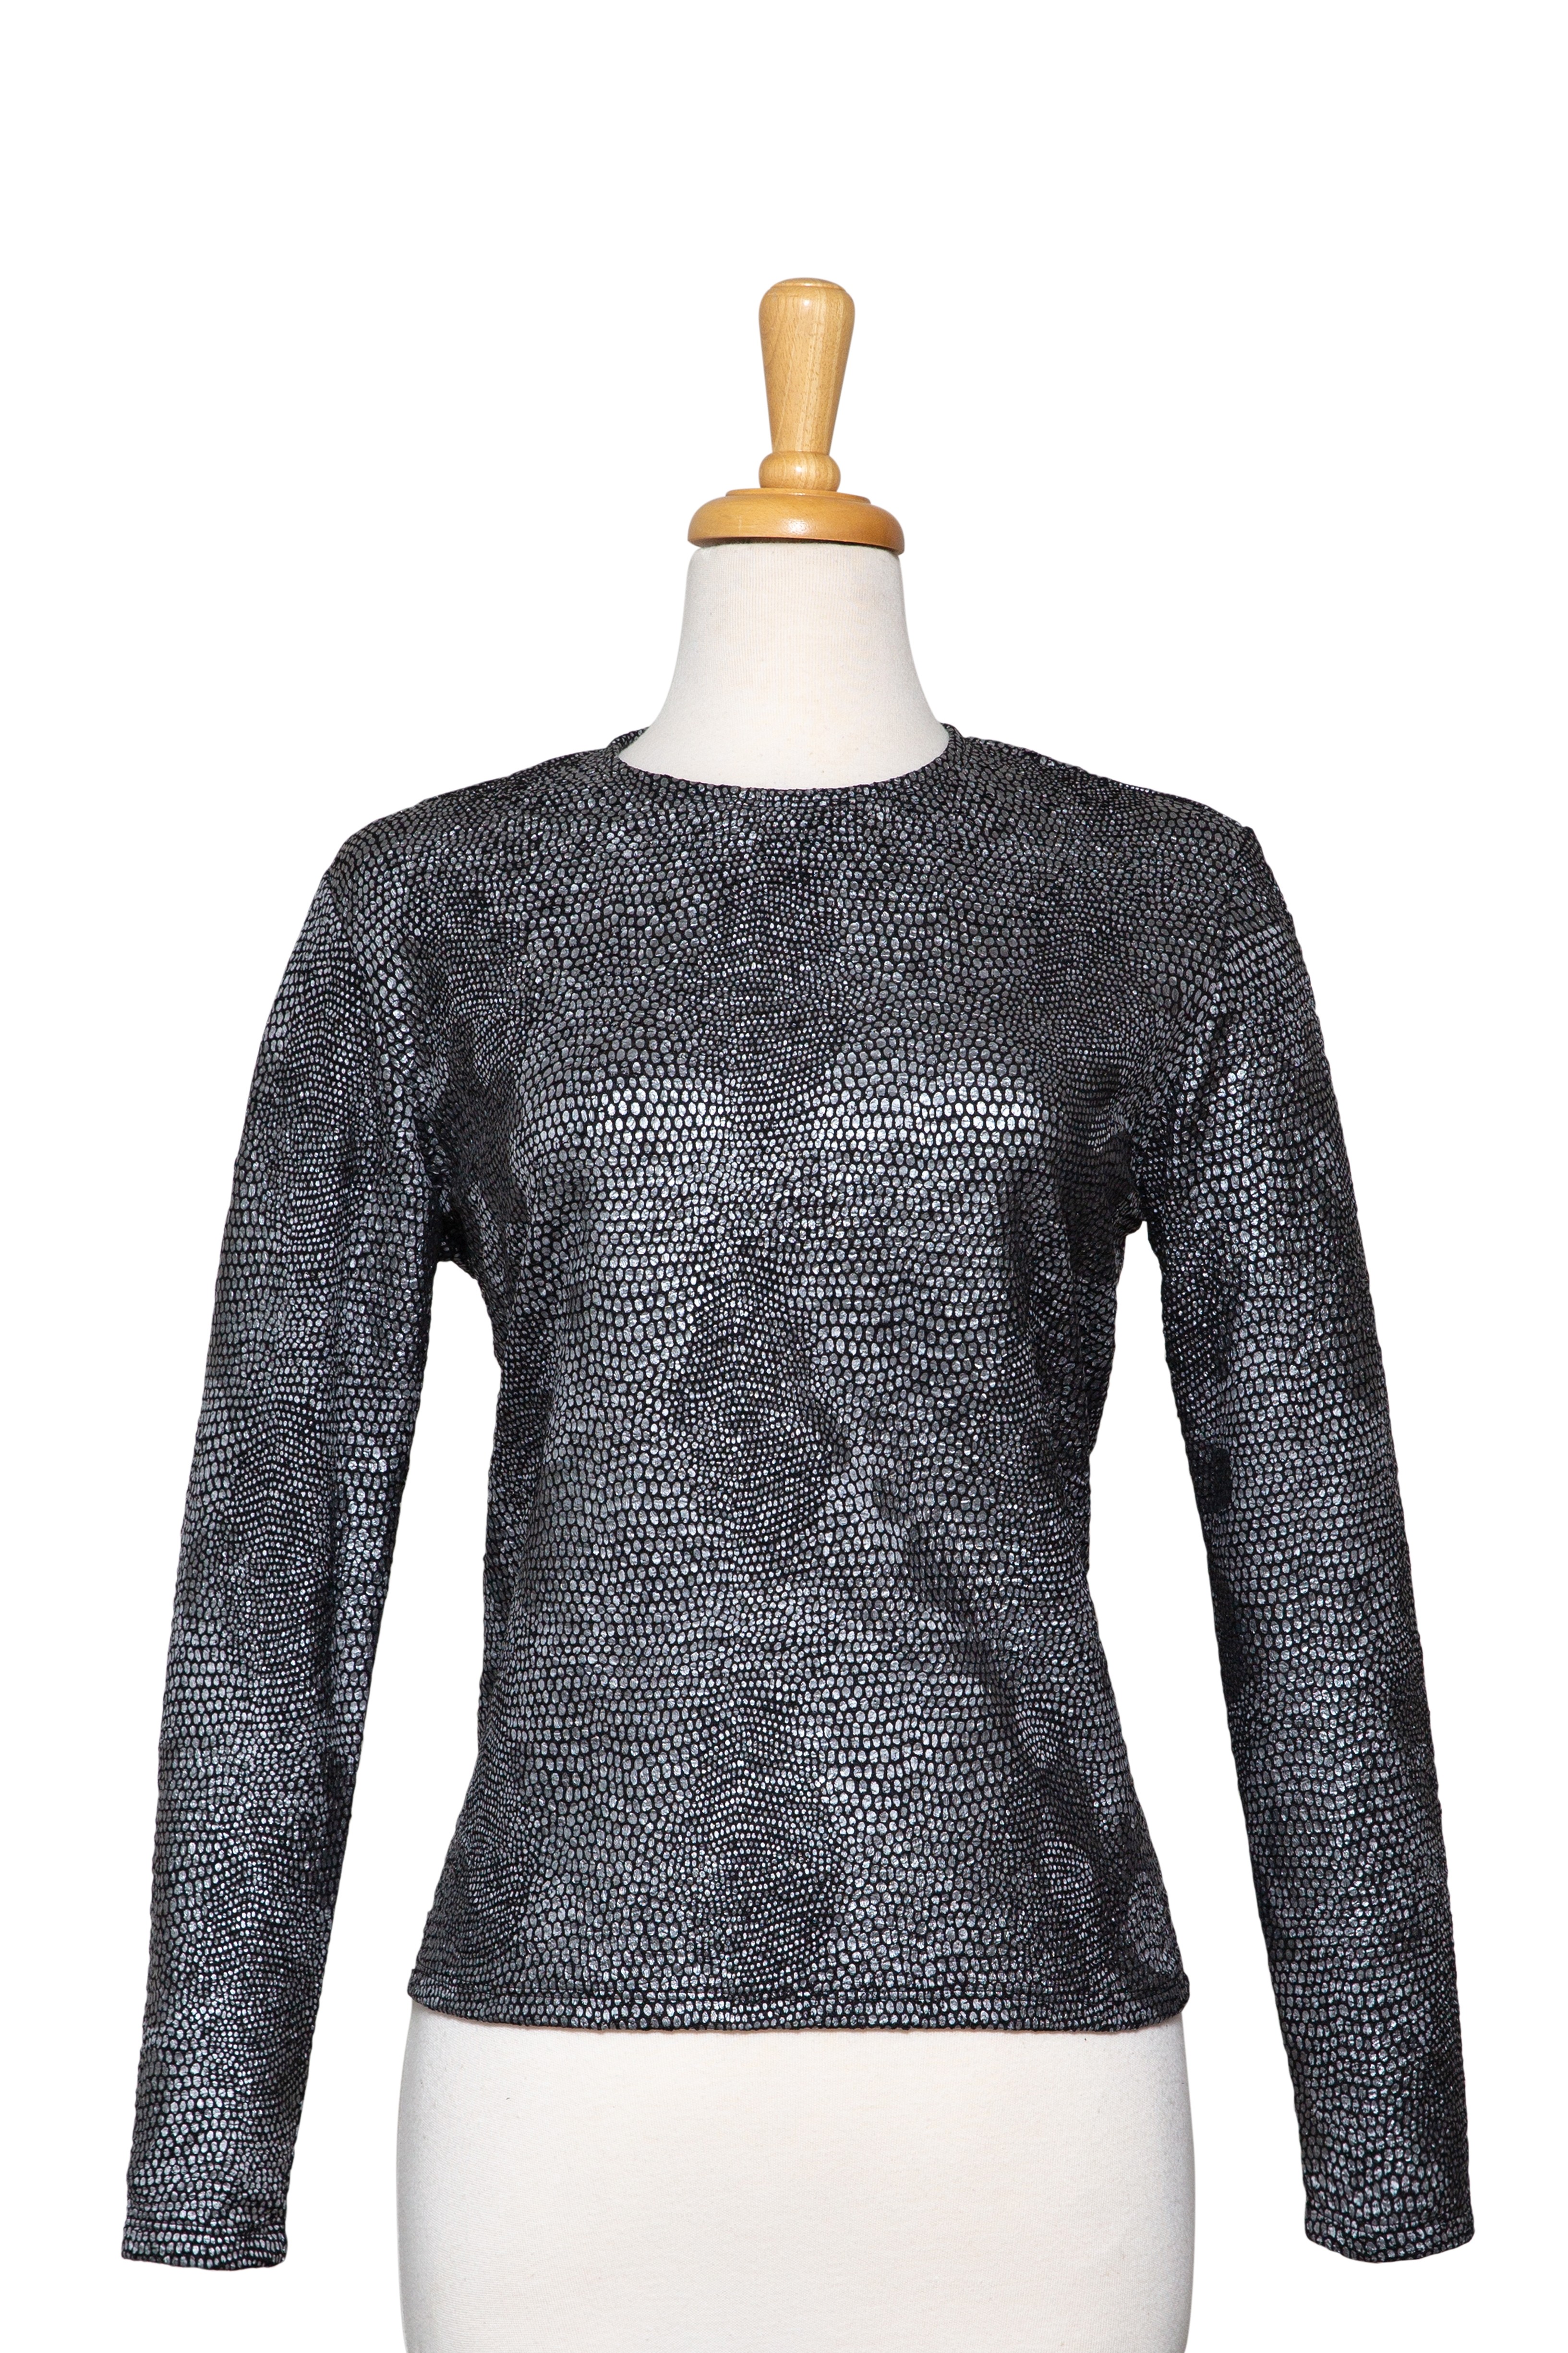 Black and Silver Foil Snakeskin Pattern Textured Long Sleeve Top